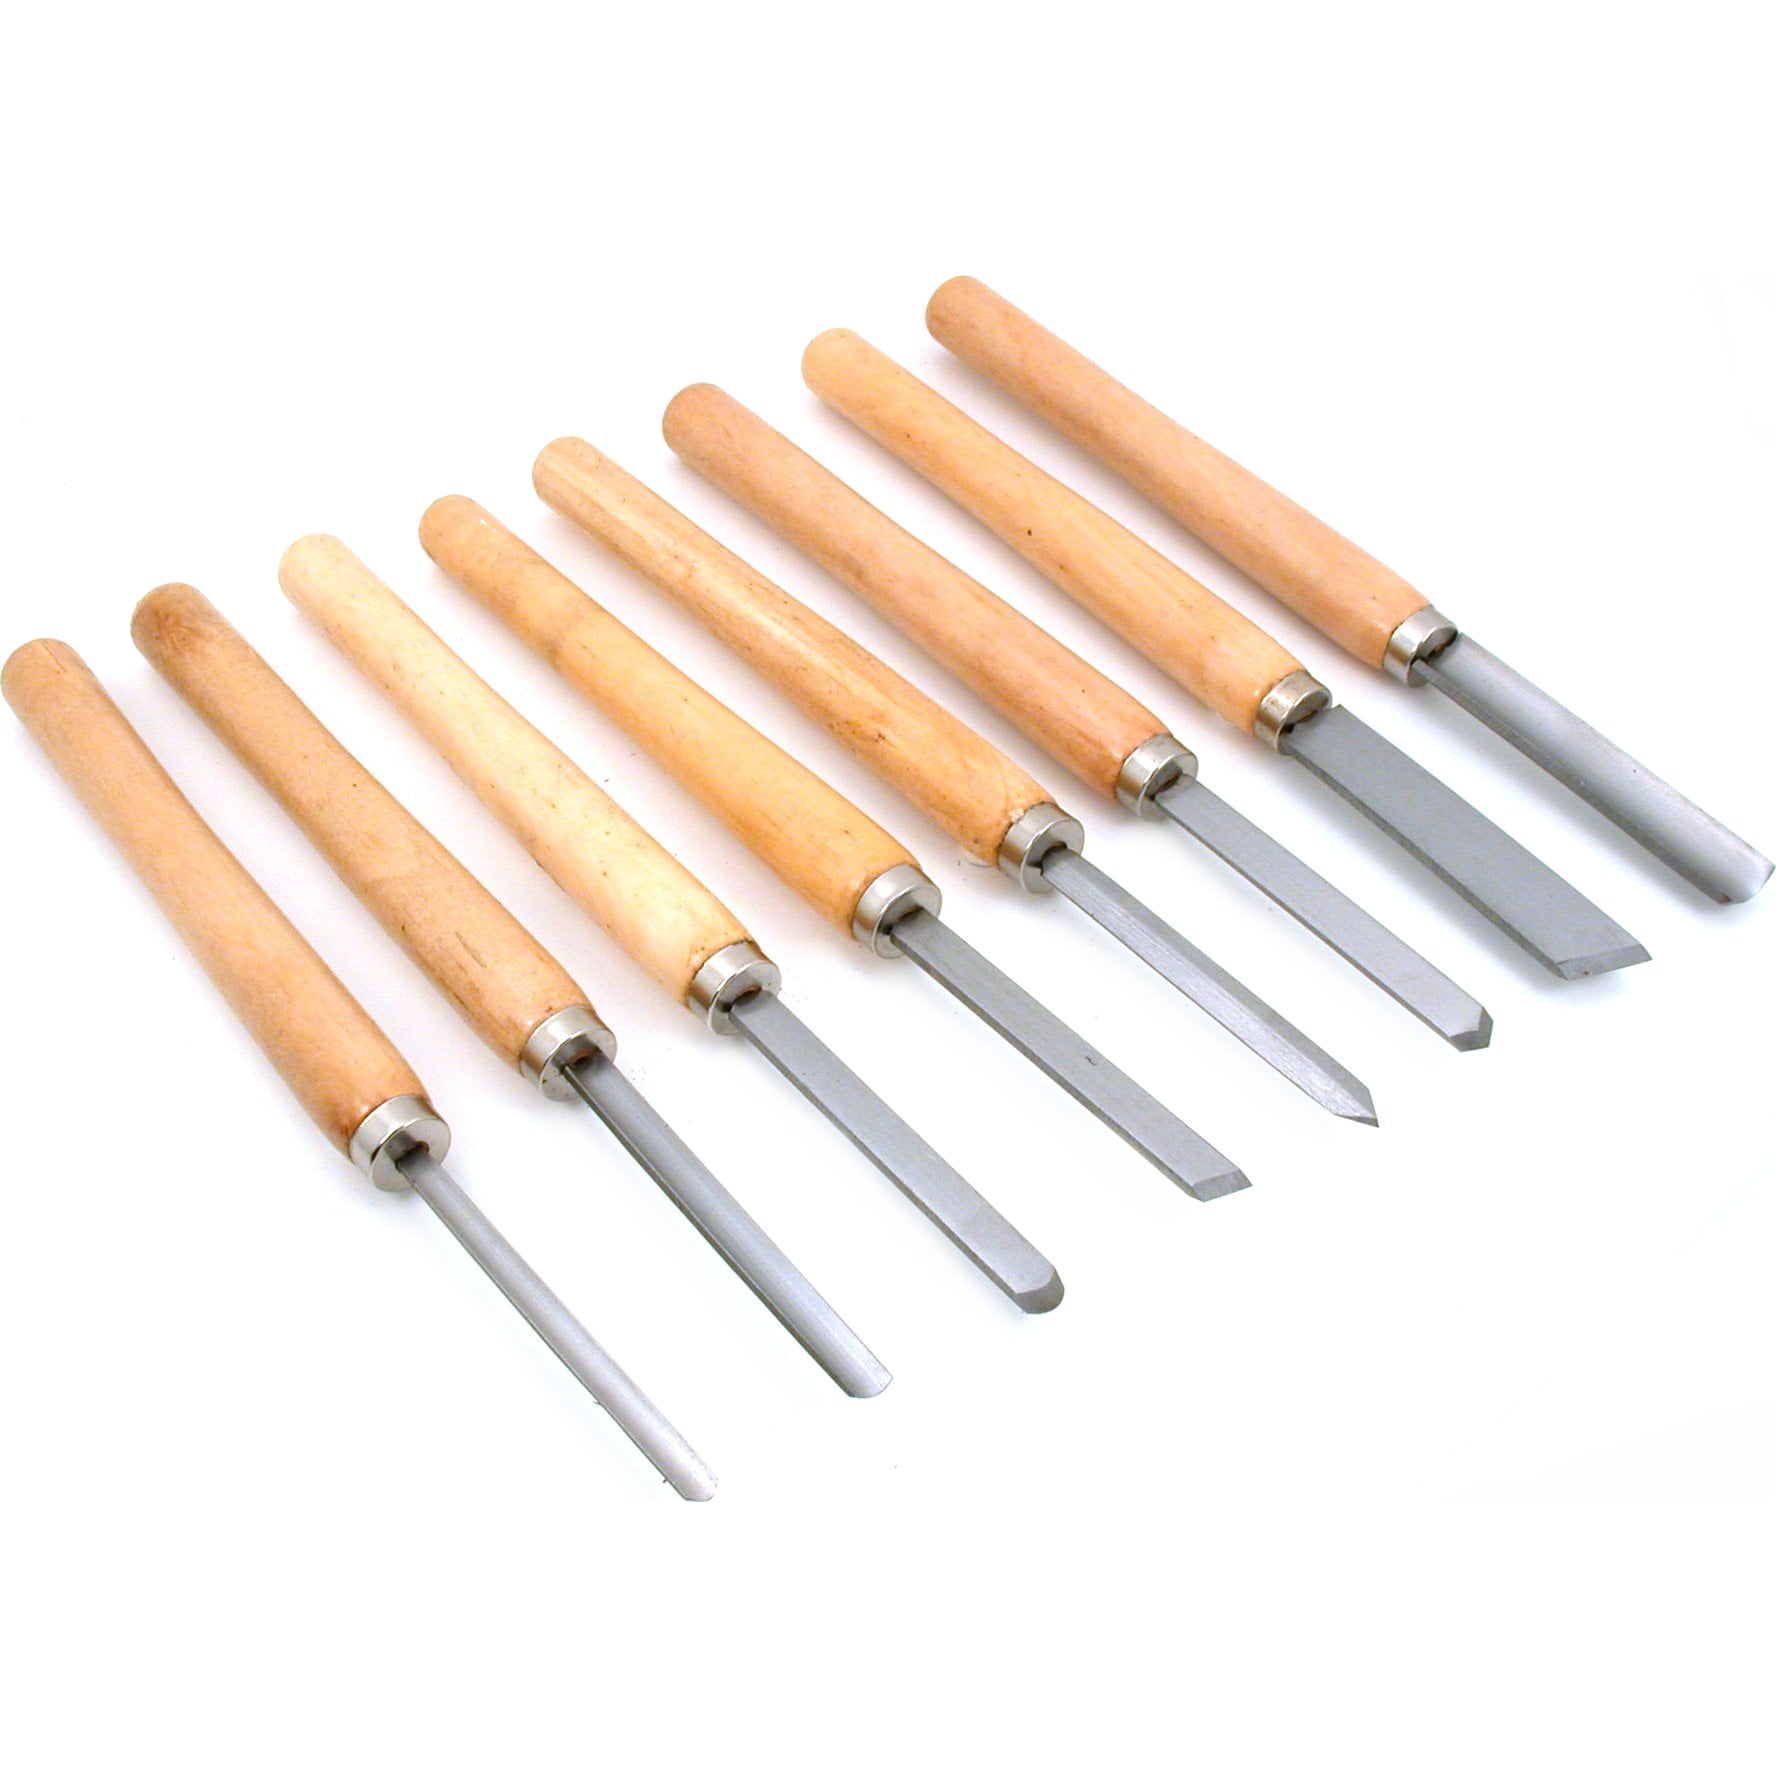 8 Wood Turning Chisel Woodworking Gouges Hobby Tool ...